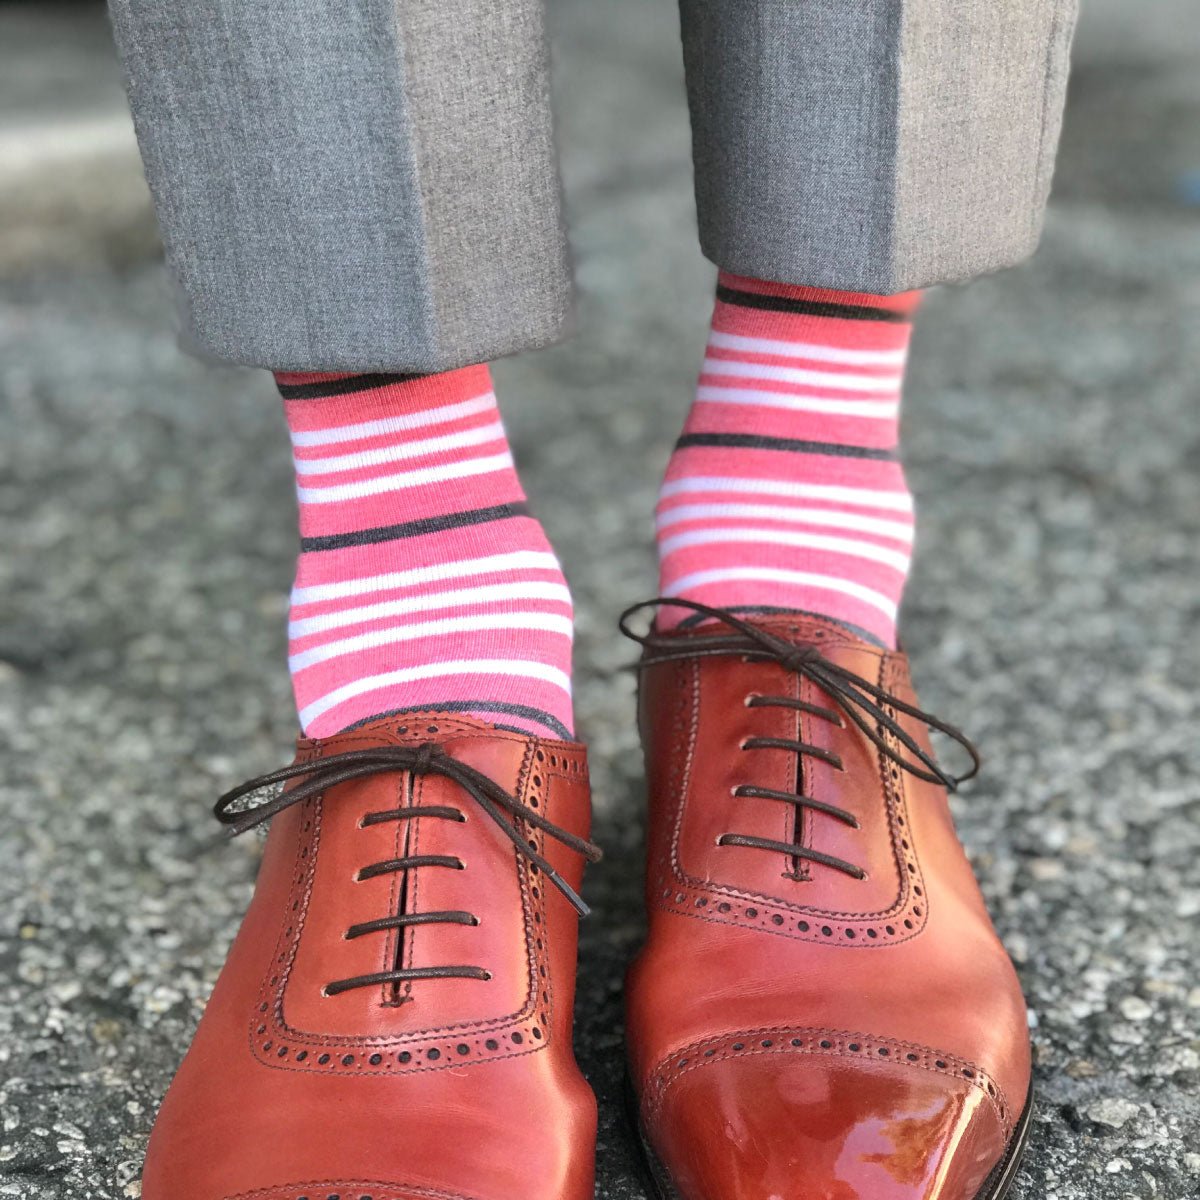 Guy wearing coral striped socks and grey pants